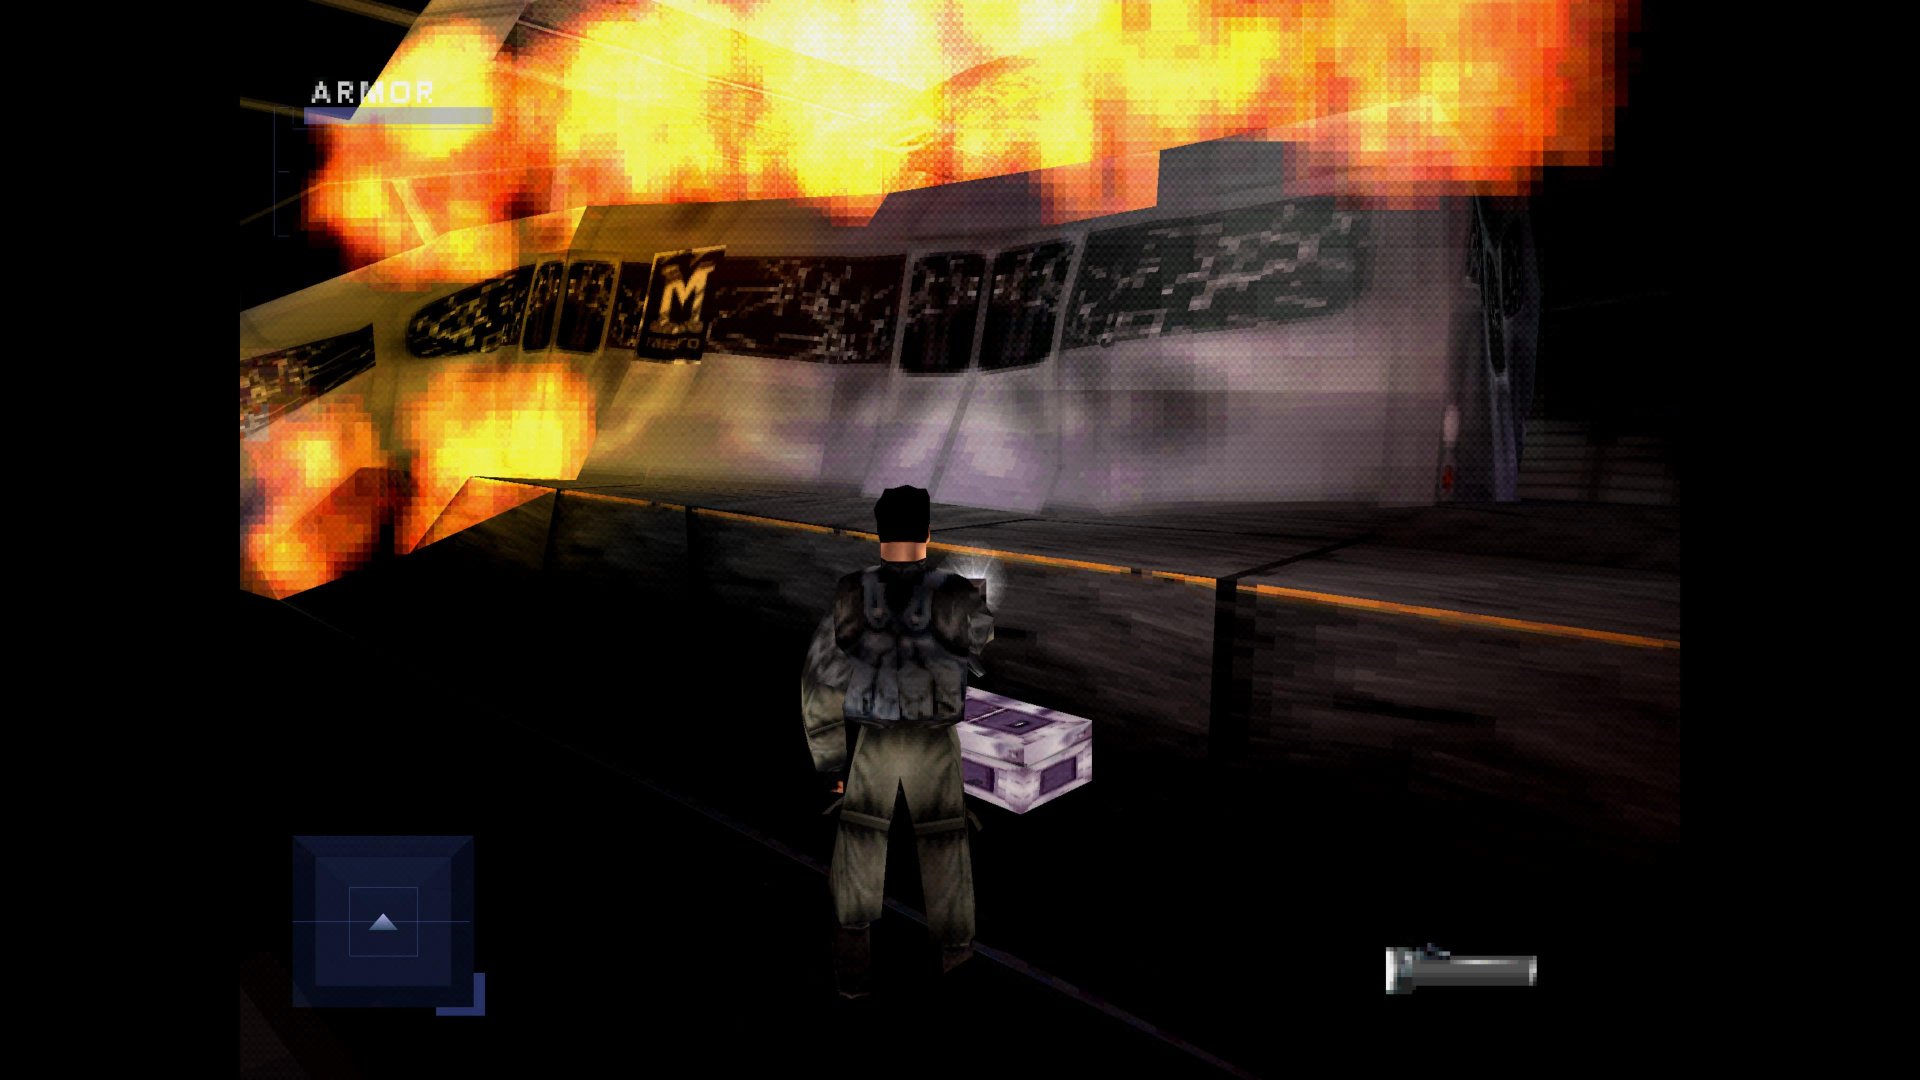 Syphon Filter: Dark Mirror patched with improved controls